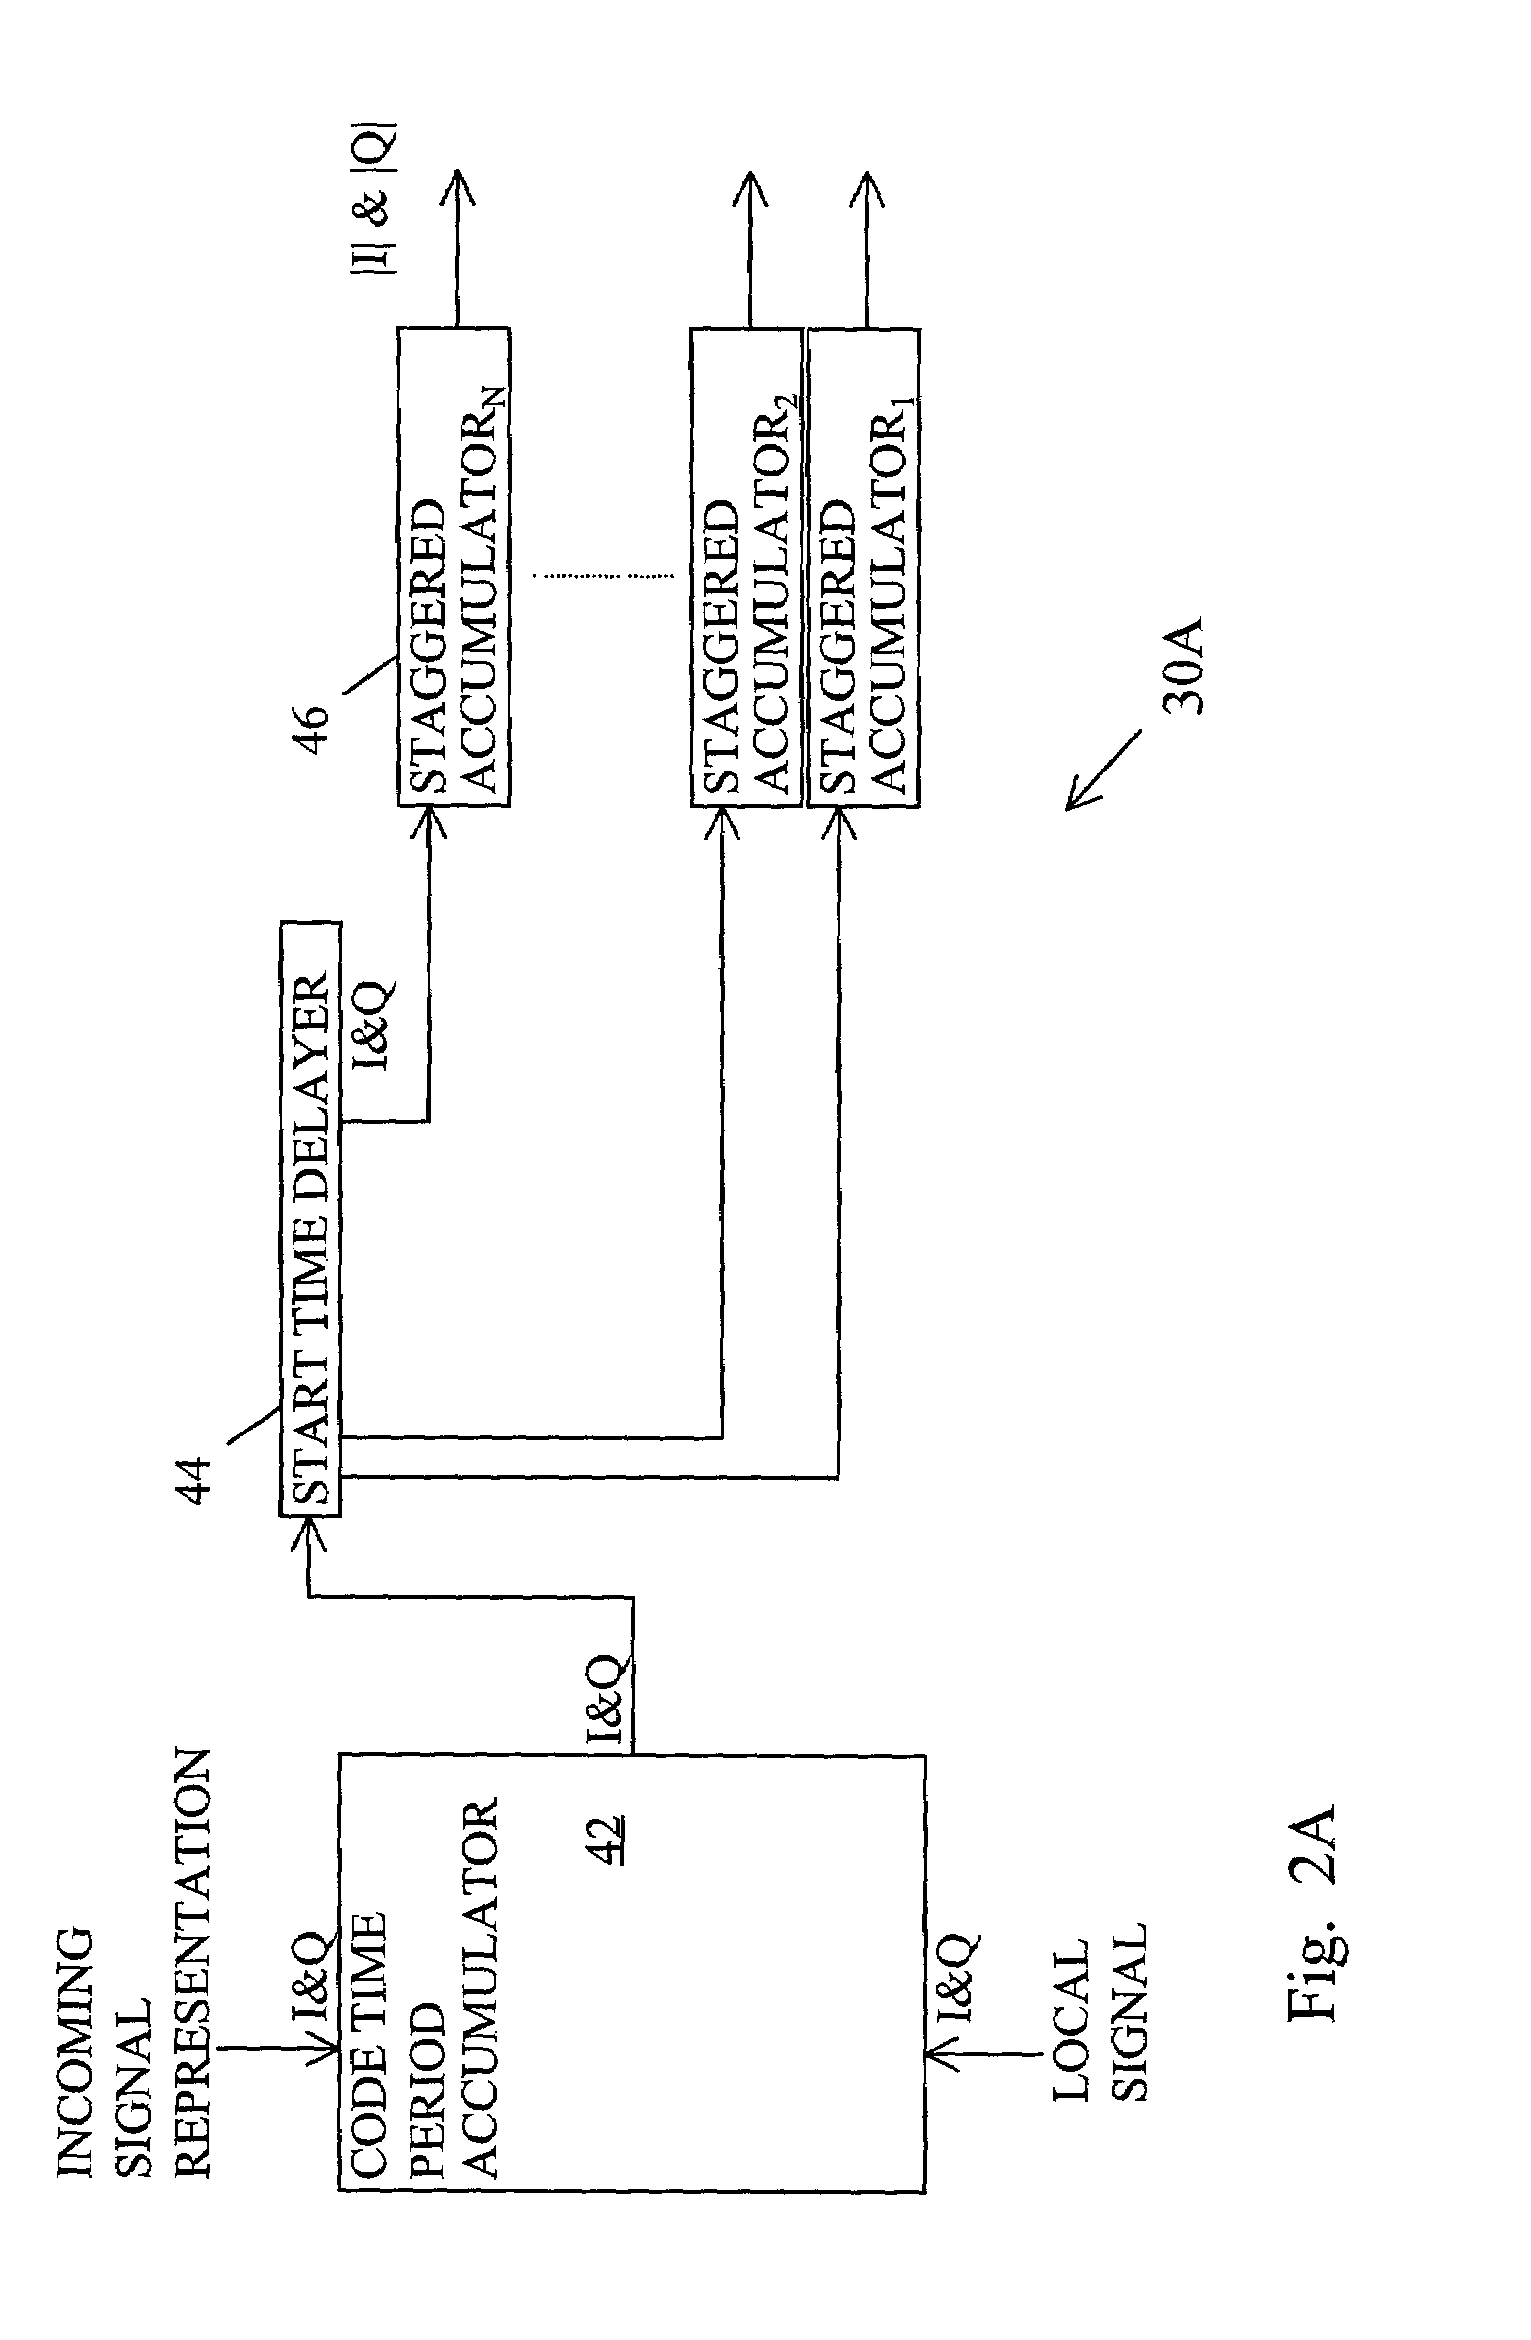 Method for determining data bit transitions for a low level spread spectrum signal